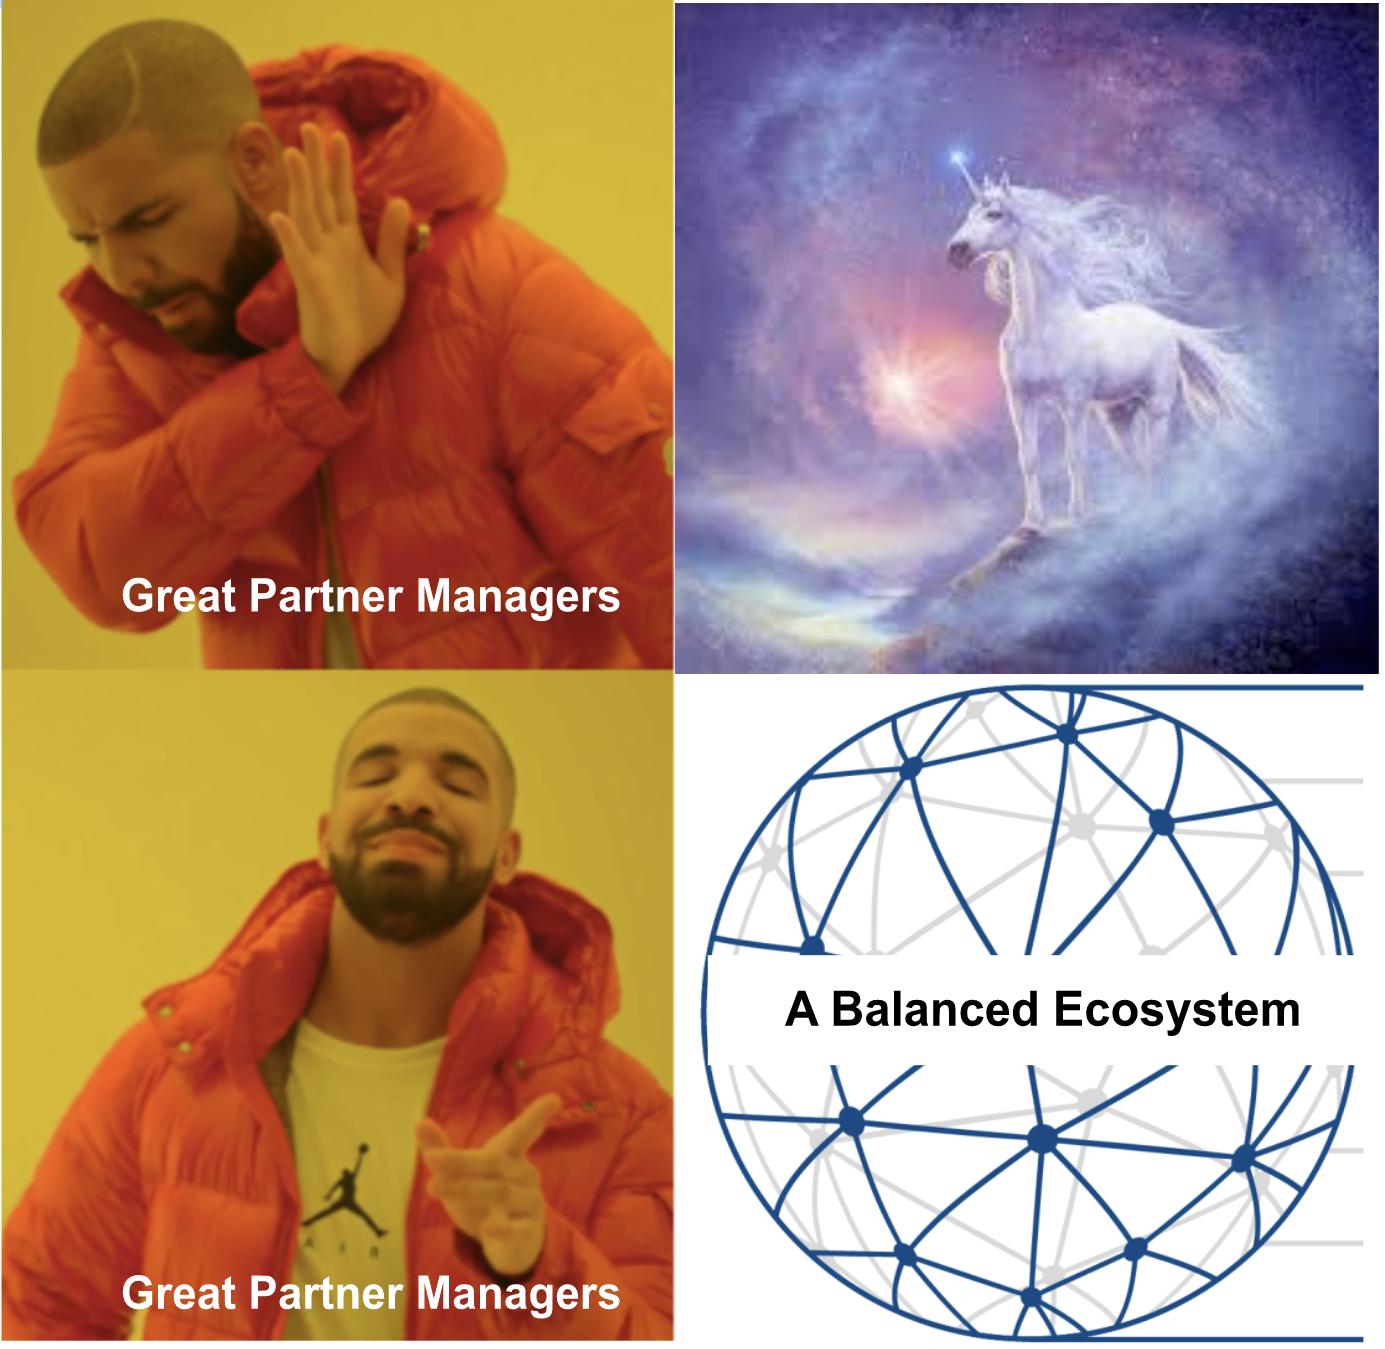 meme. great partner managers reject a unicorn. great partner managers embrace a balanced ecosystem